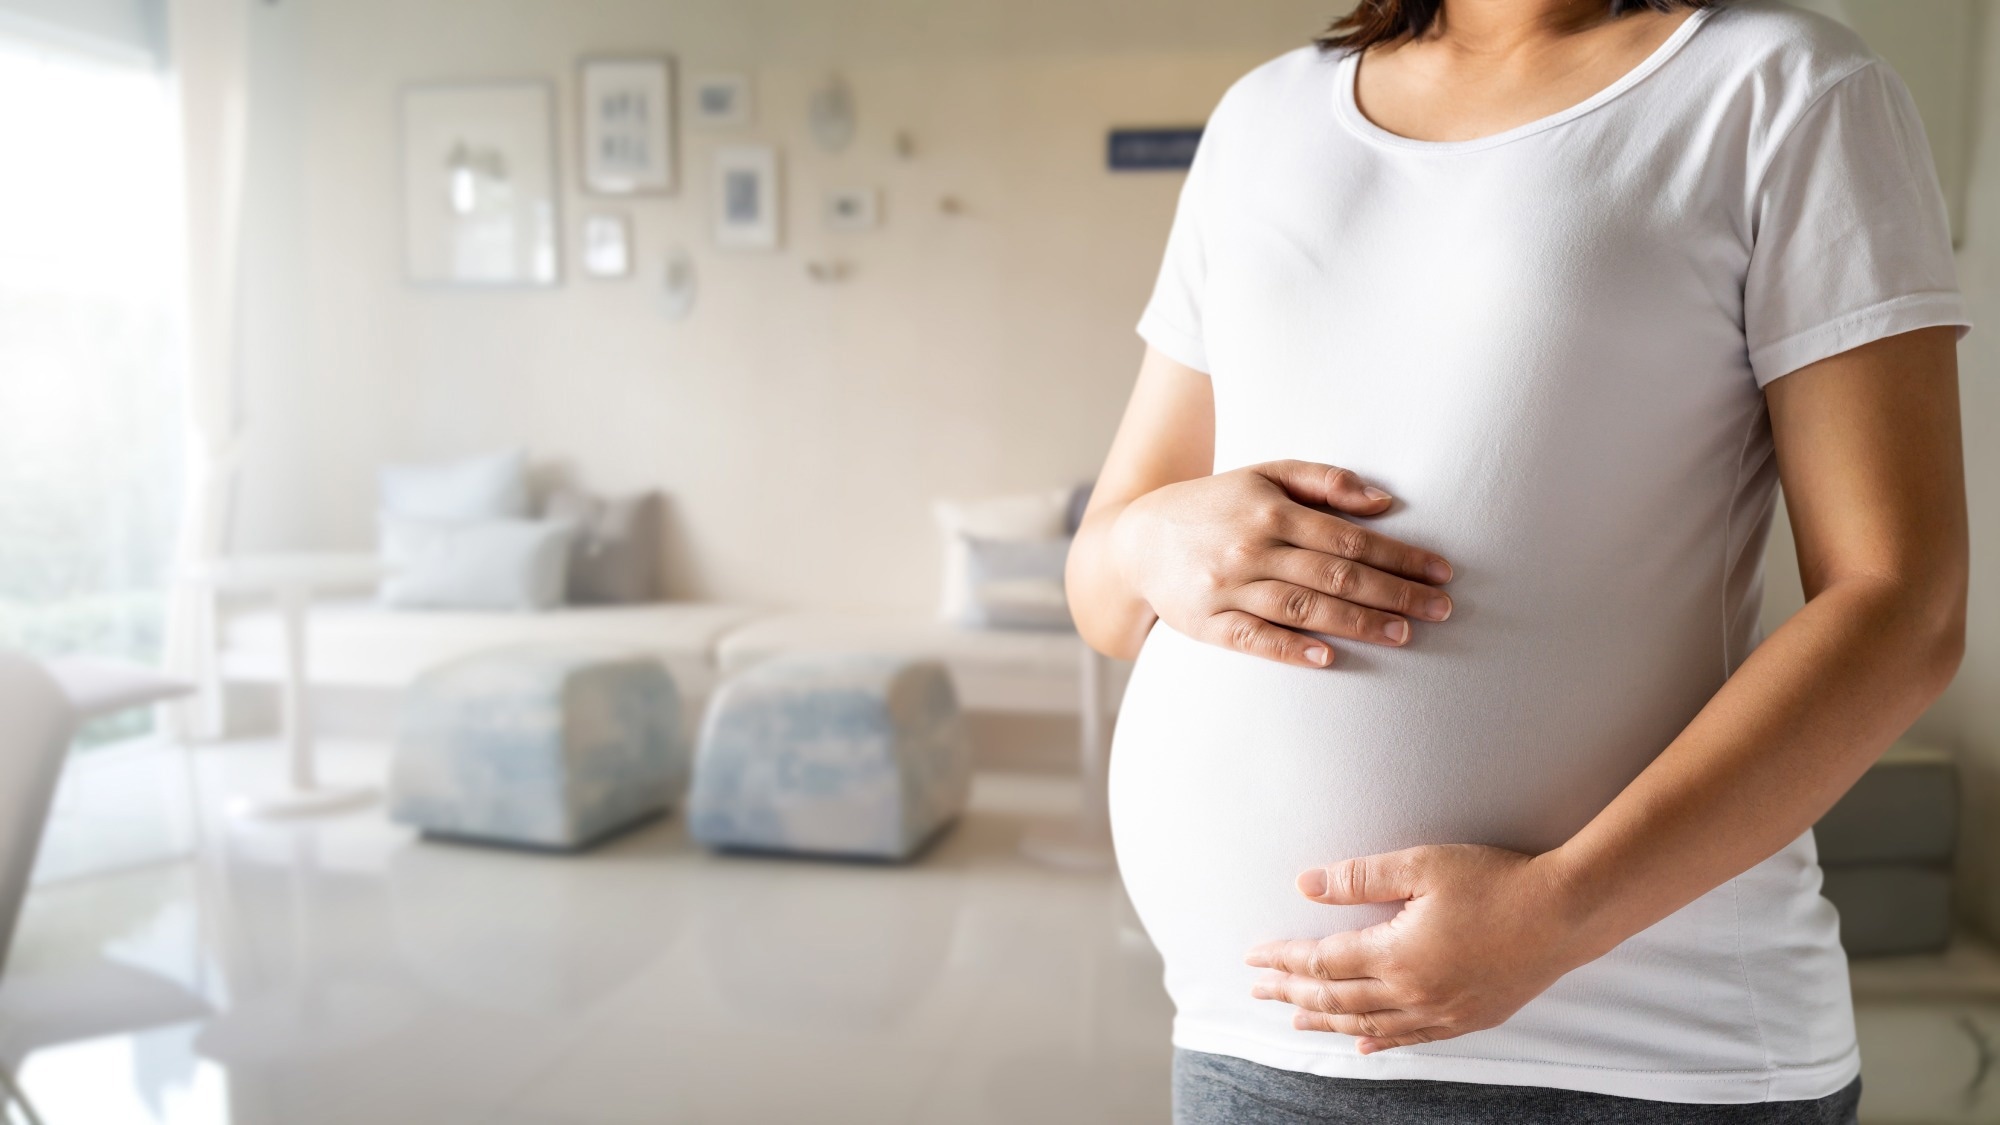 Study: The risk of miscarriage following COVID-19 vaccination: a systematic review and meta-analysis. Image Credit: Blue Planet Studio / Shutterstock